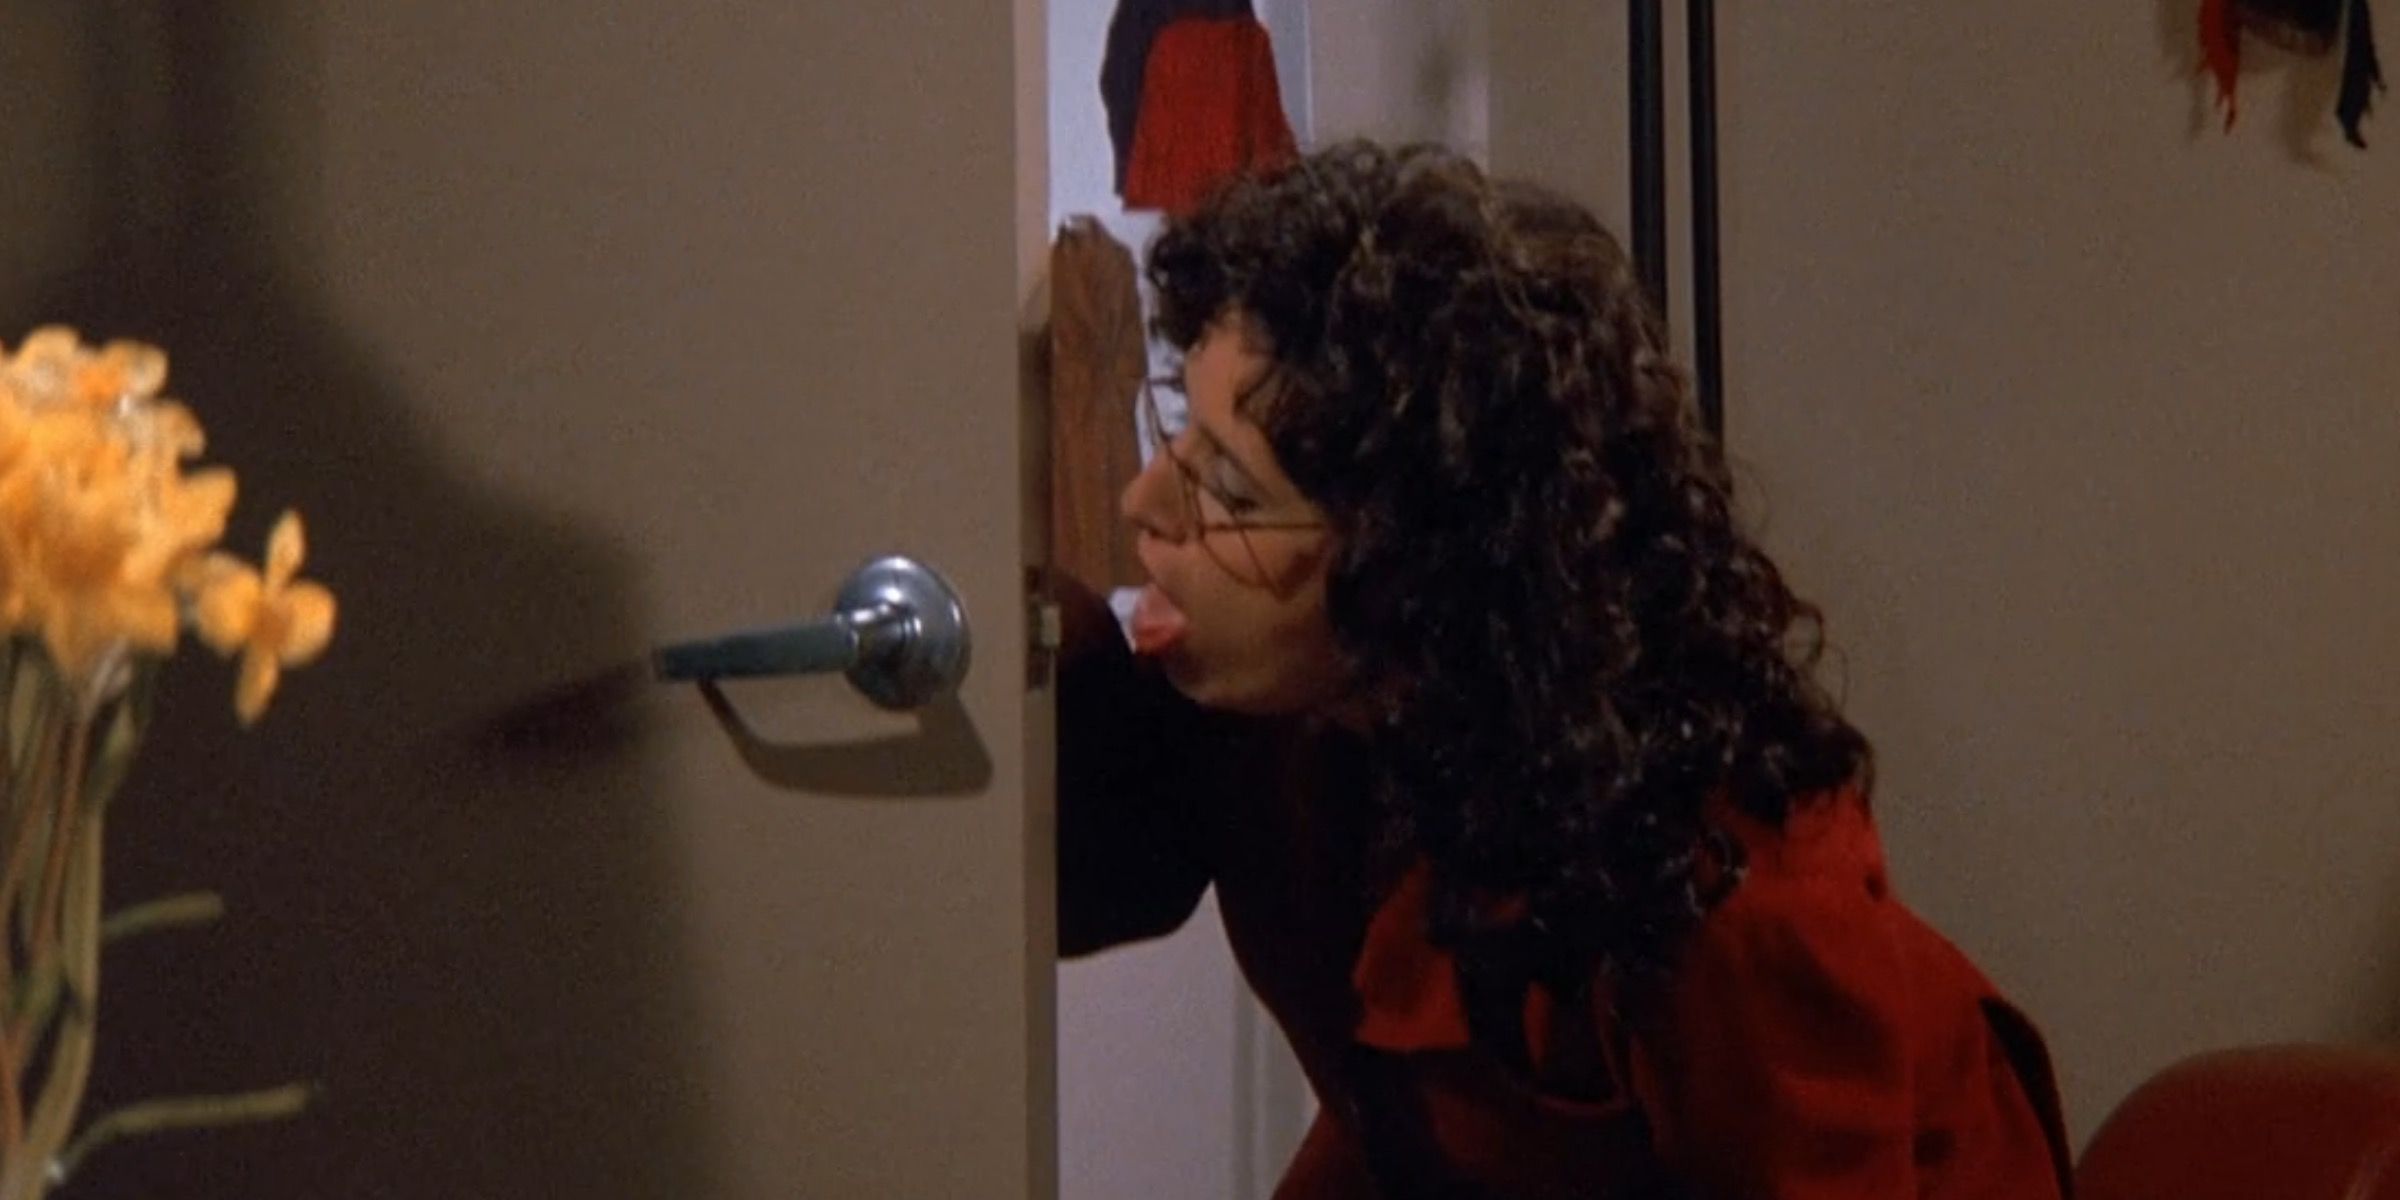 Elaine coughs on Peggy's doorknobs